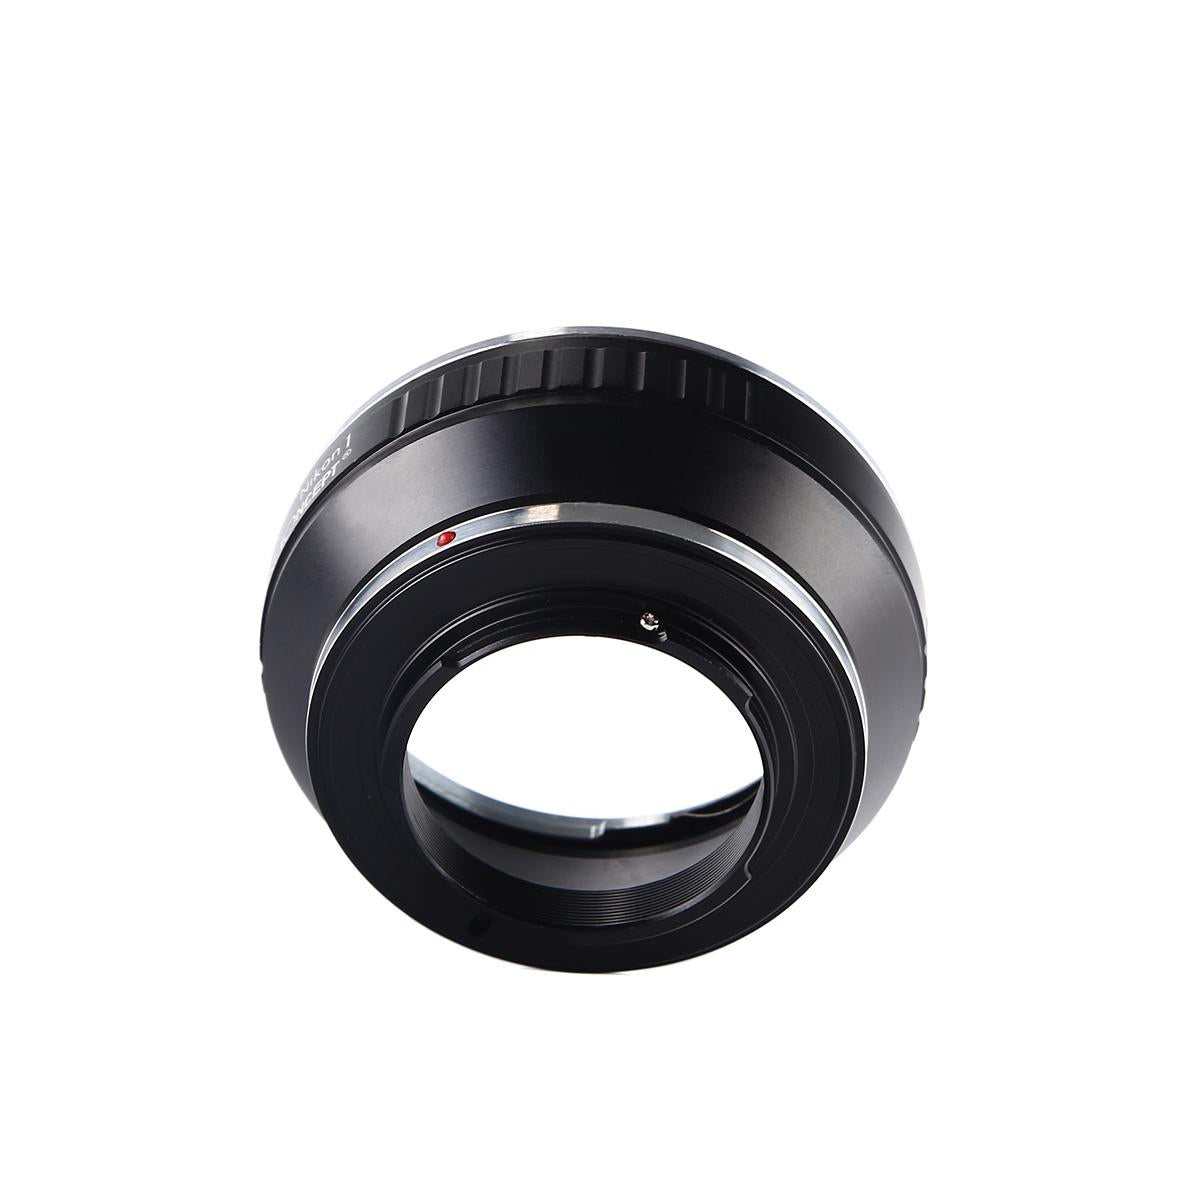 K&F Concept Lens Mount Adapter, Canon EOS EF Mount Lens to Nikon 1-Series Camera, fits Nikon V1, J1 Mirrorless Cameras, fits EOS EF, and EF-S Lenses